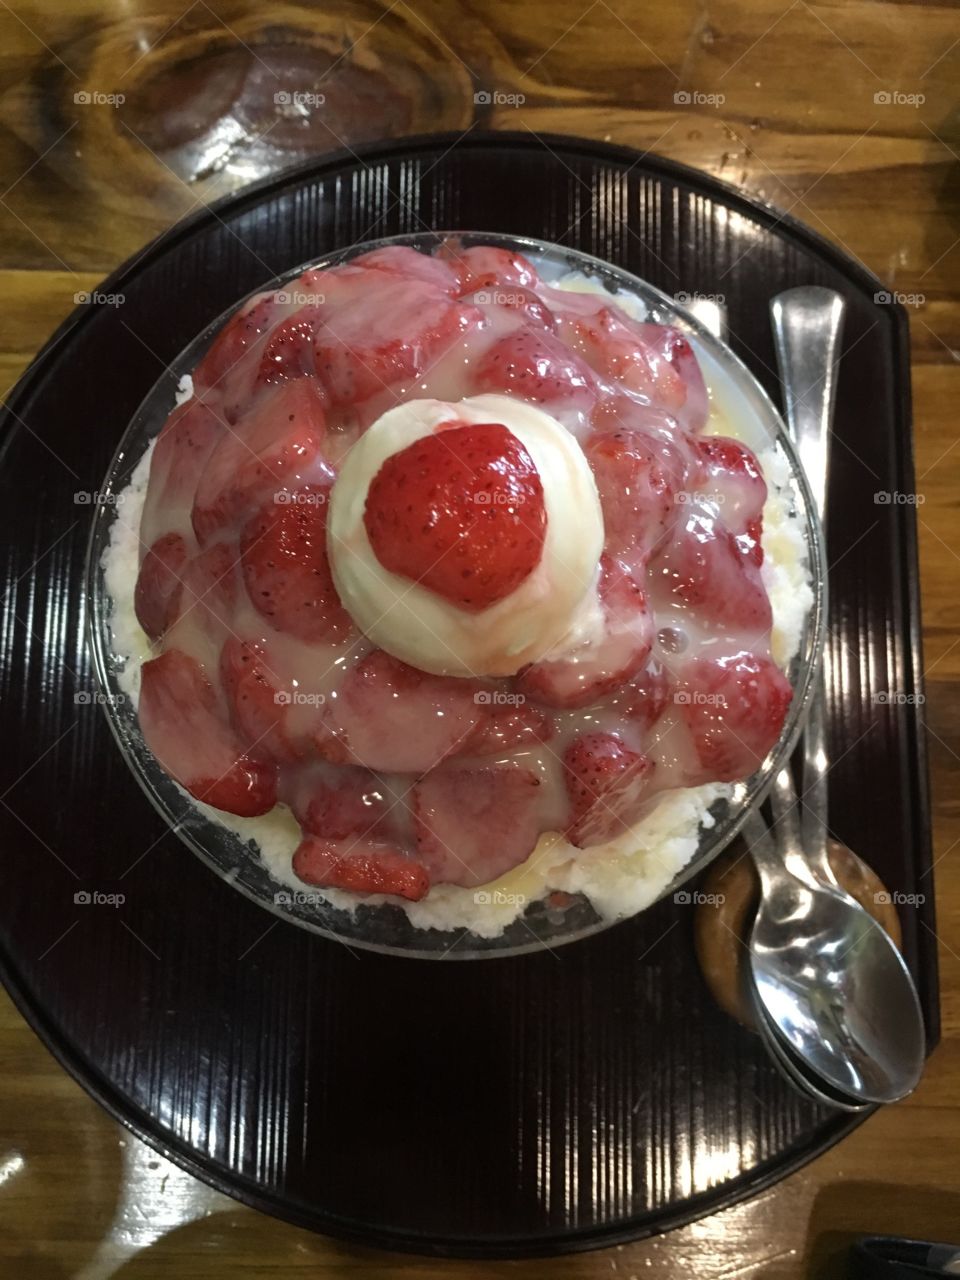 Strawberry in shaved ice